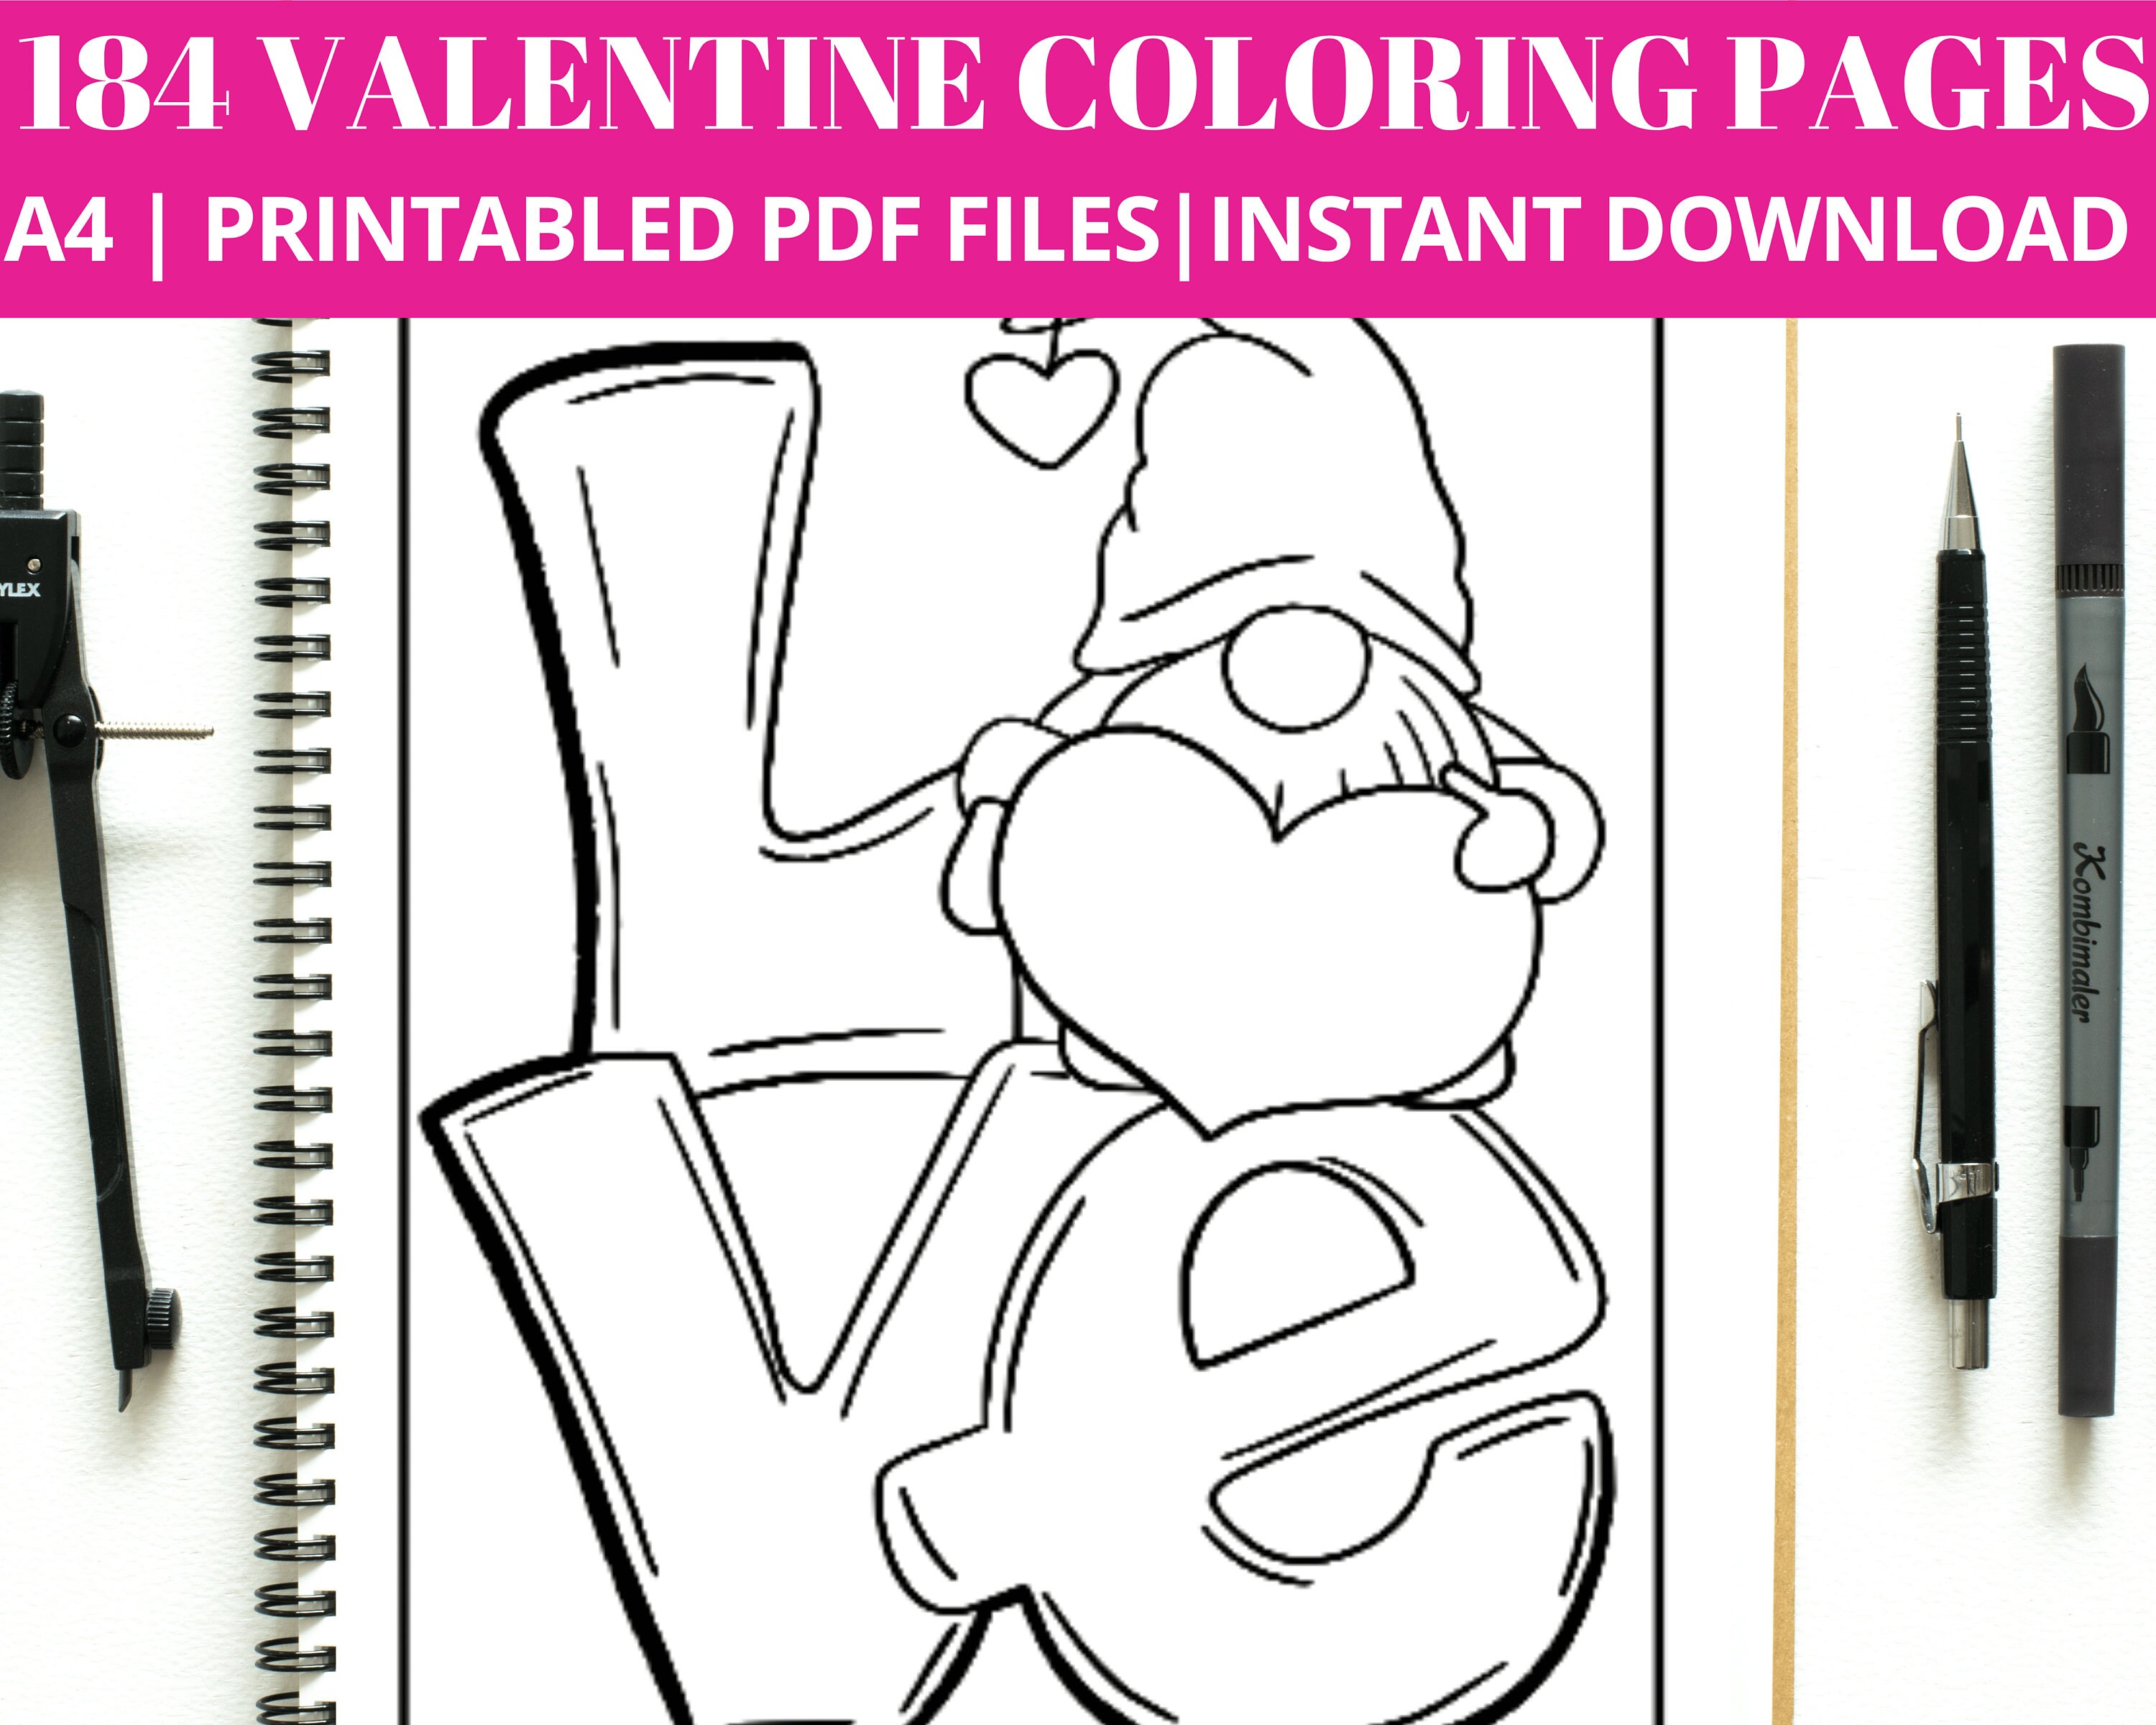 Valentines day coloring page set valentines